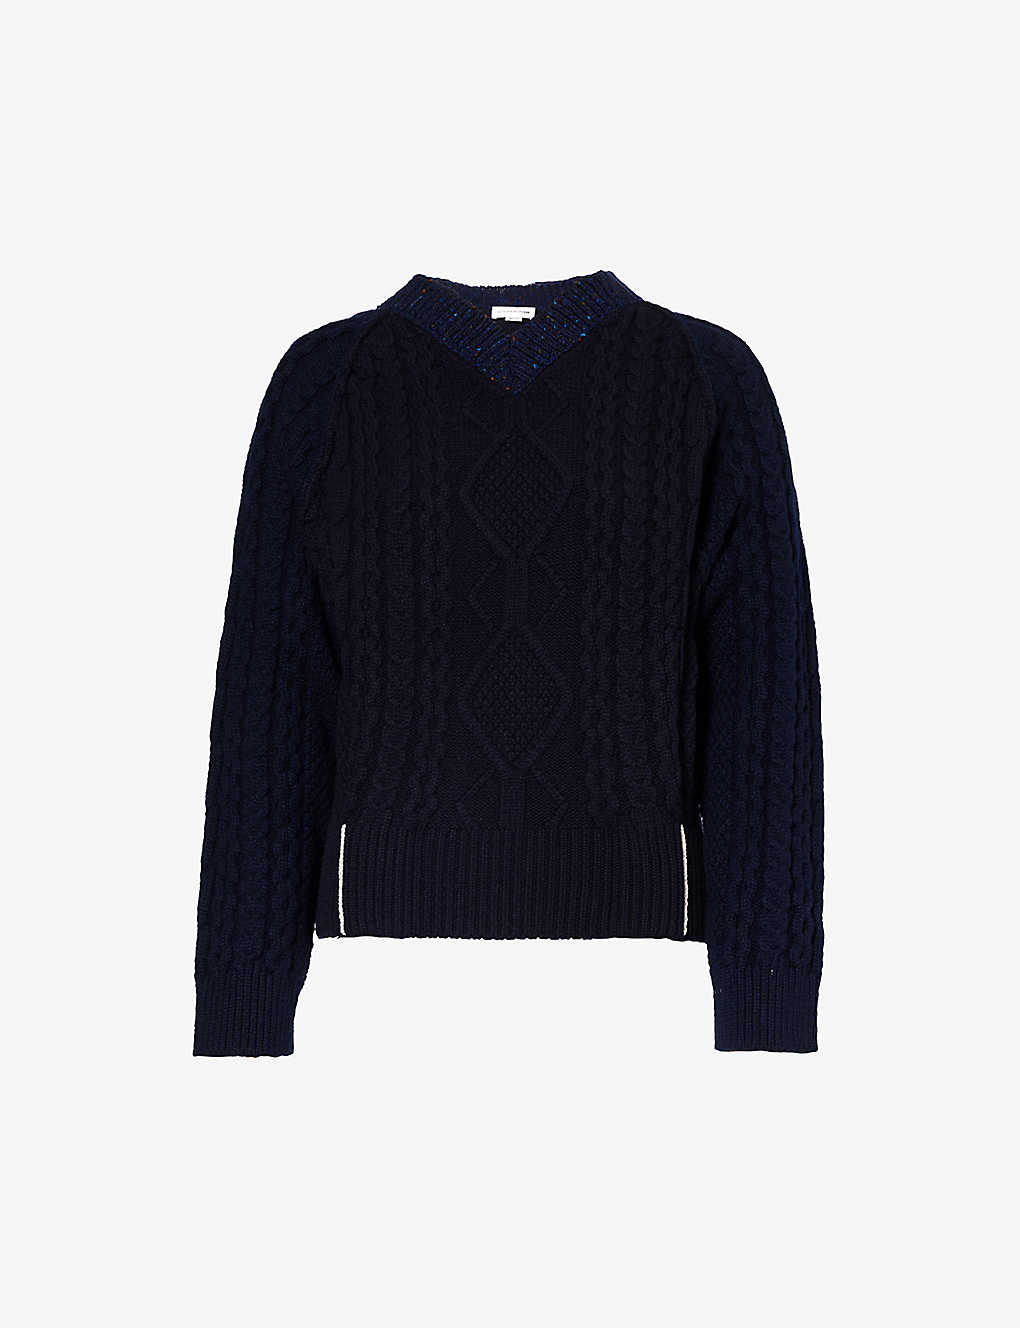 Victoria Beckham Womens Navy V-neck Cable-knitted Wool Jumper